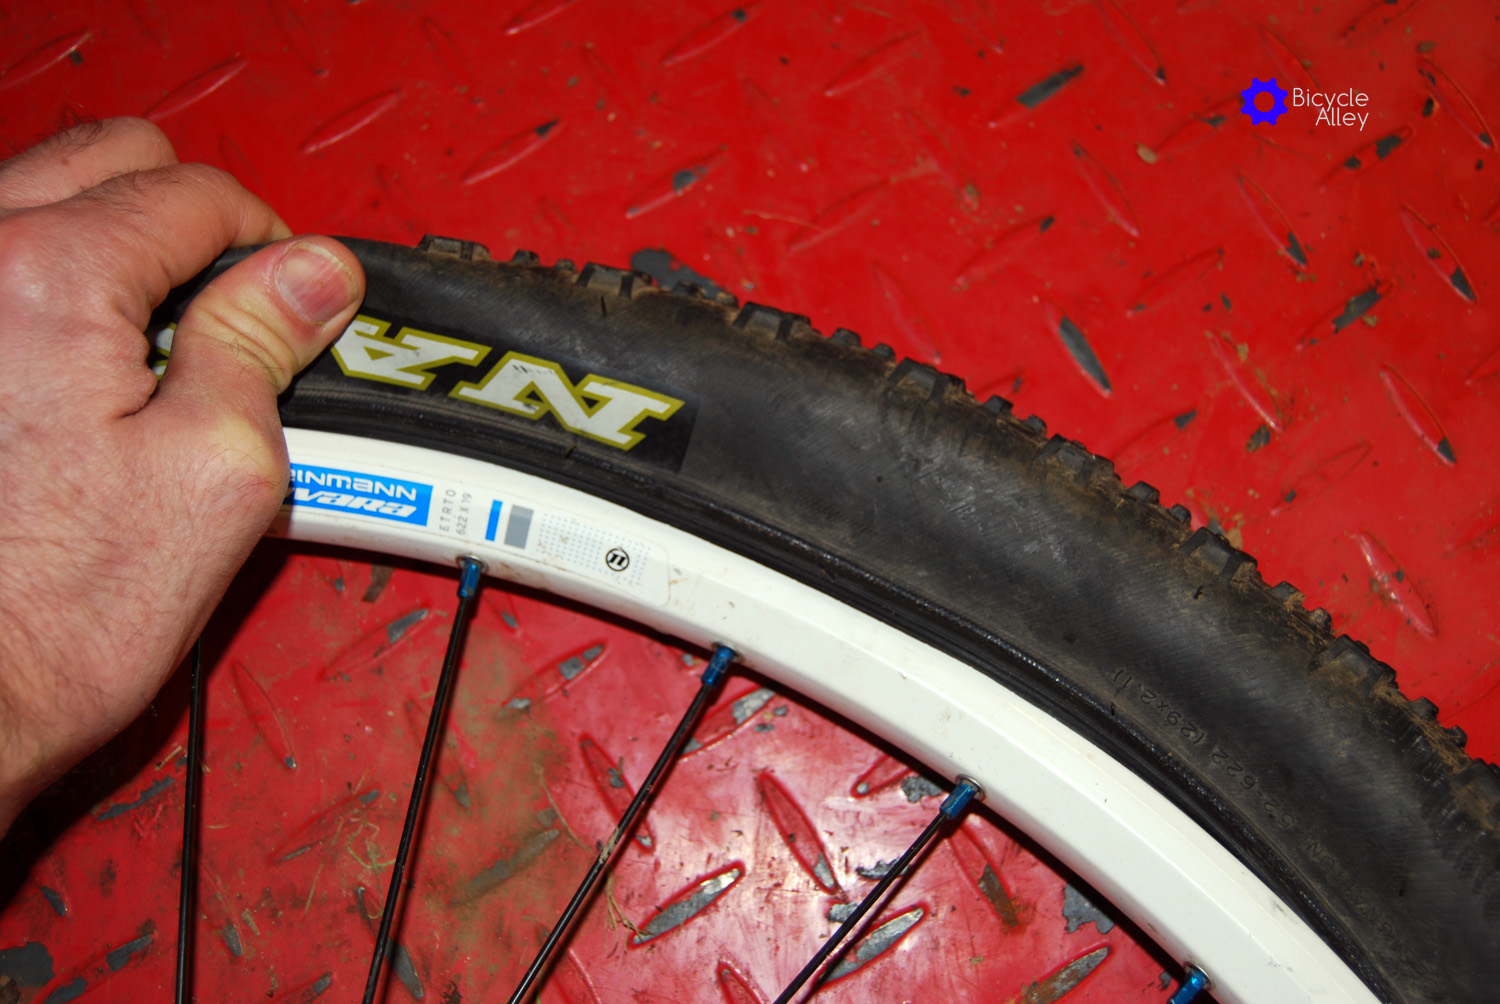 Lift tire up and out to remove tire bead from rim